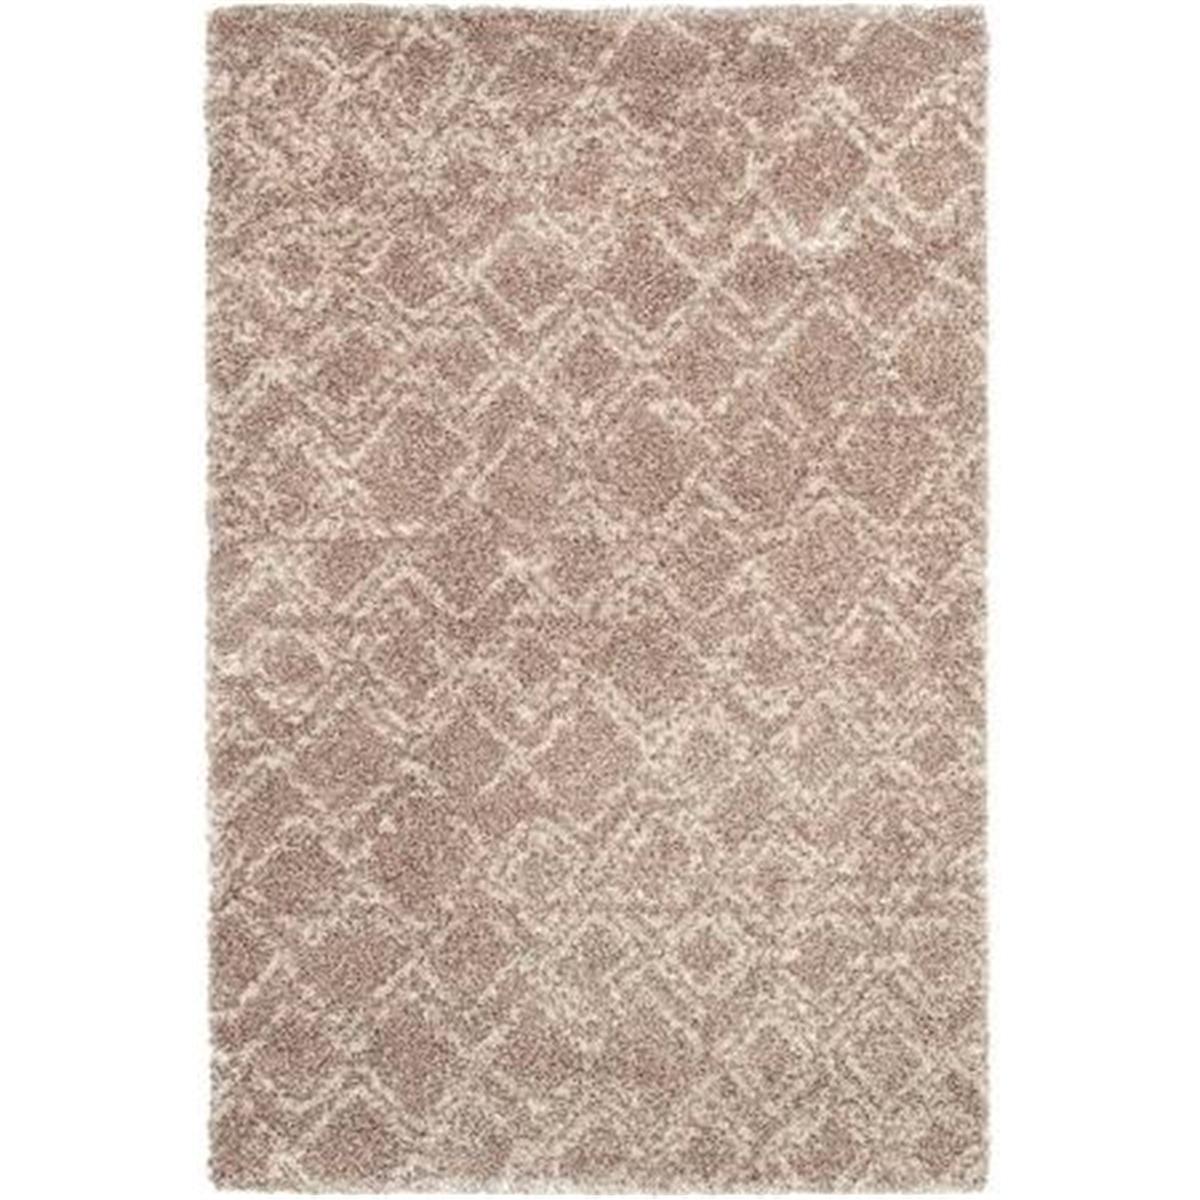 43150600092129t 9 Ft. 2 In. X 12 Ft. 9 In. Bromley Pinnacle Rug - Camel & Ivory